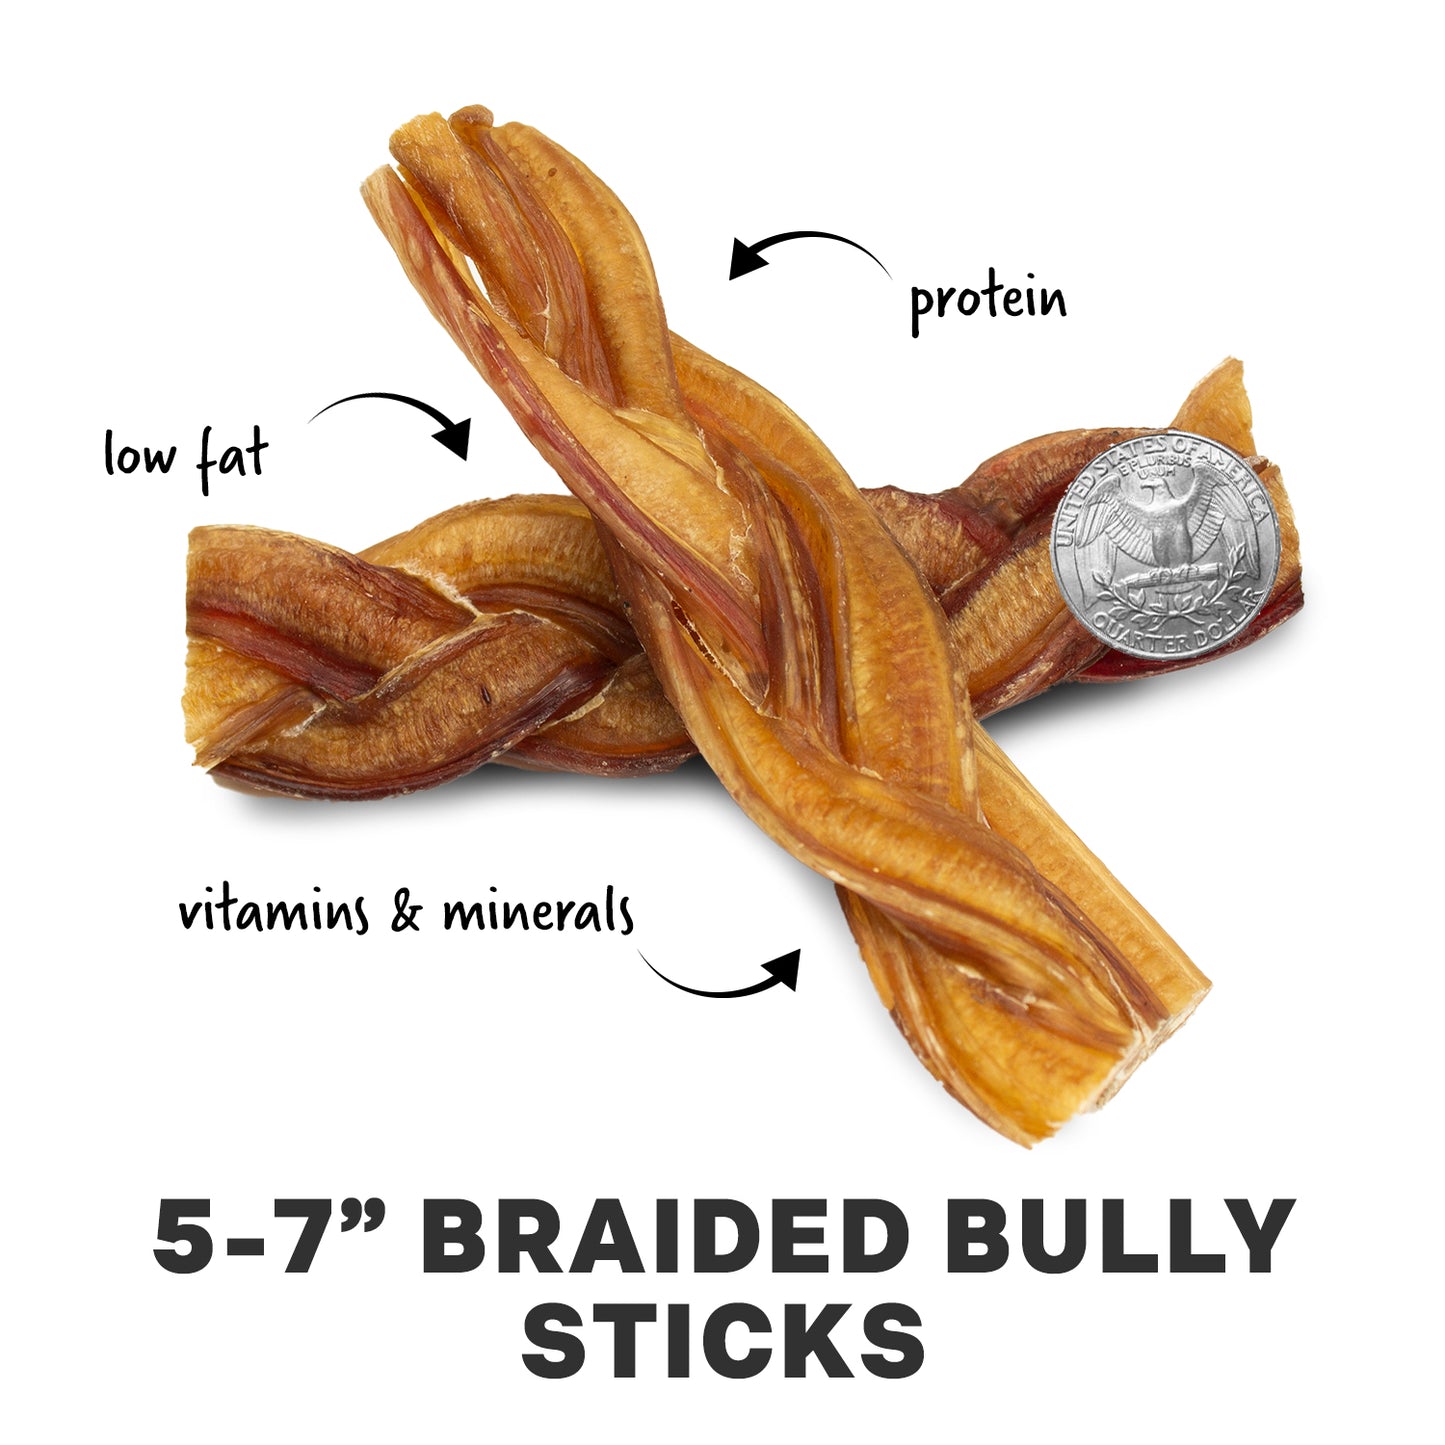 5" and 7" Braided Bully Sticks - Natural Dog Chew Treats - By Pack